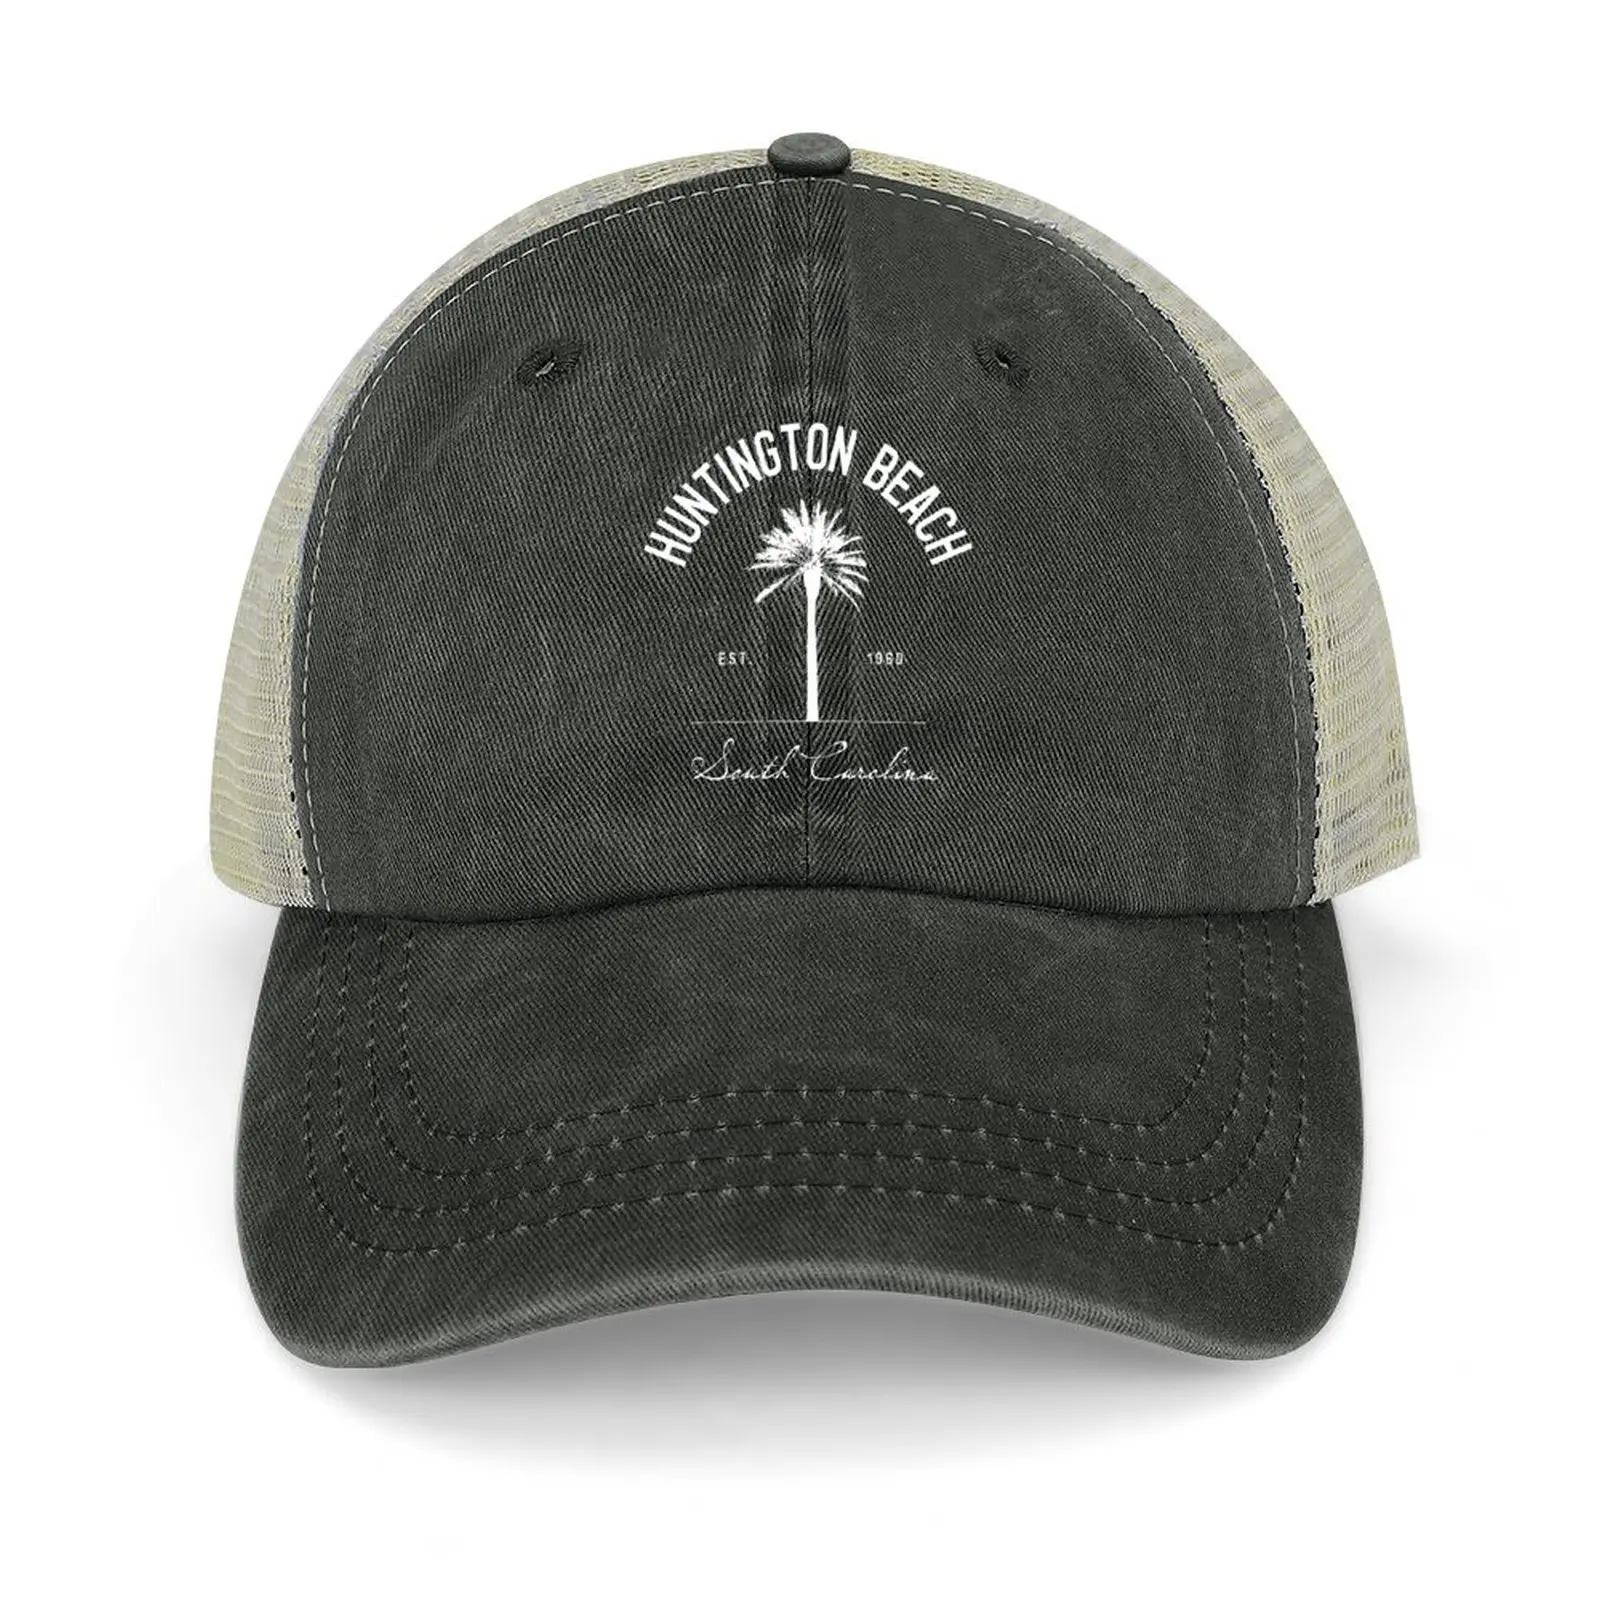 

Huntington Beach State Park SC Palm Tree Camping Gift Cowboy Hat Mountaineering hiking hat derby hat Caps Male Women's